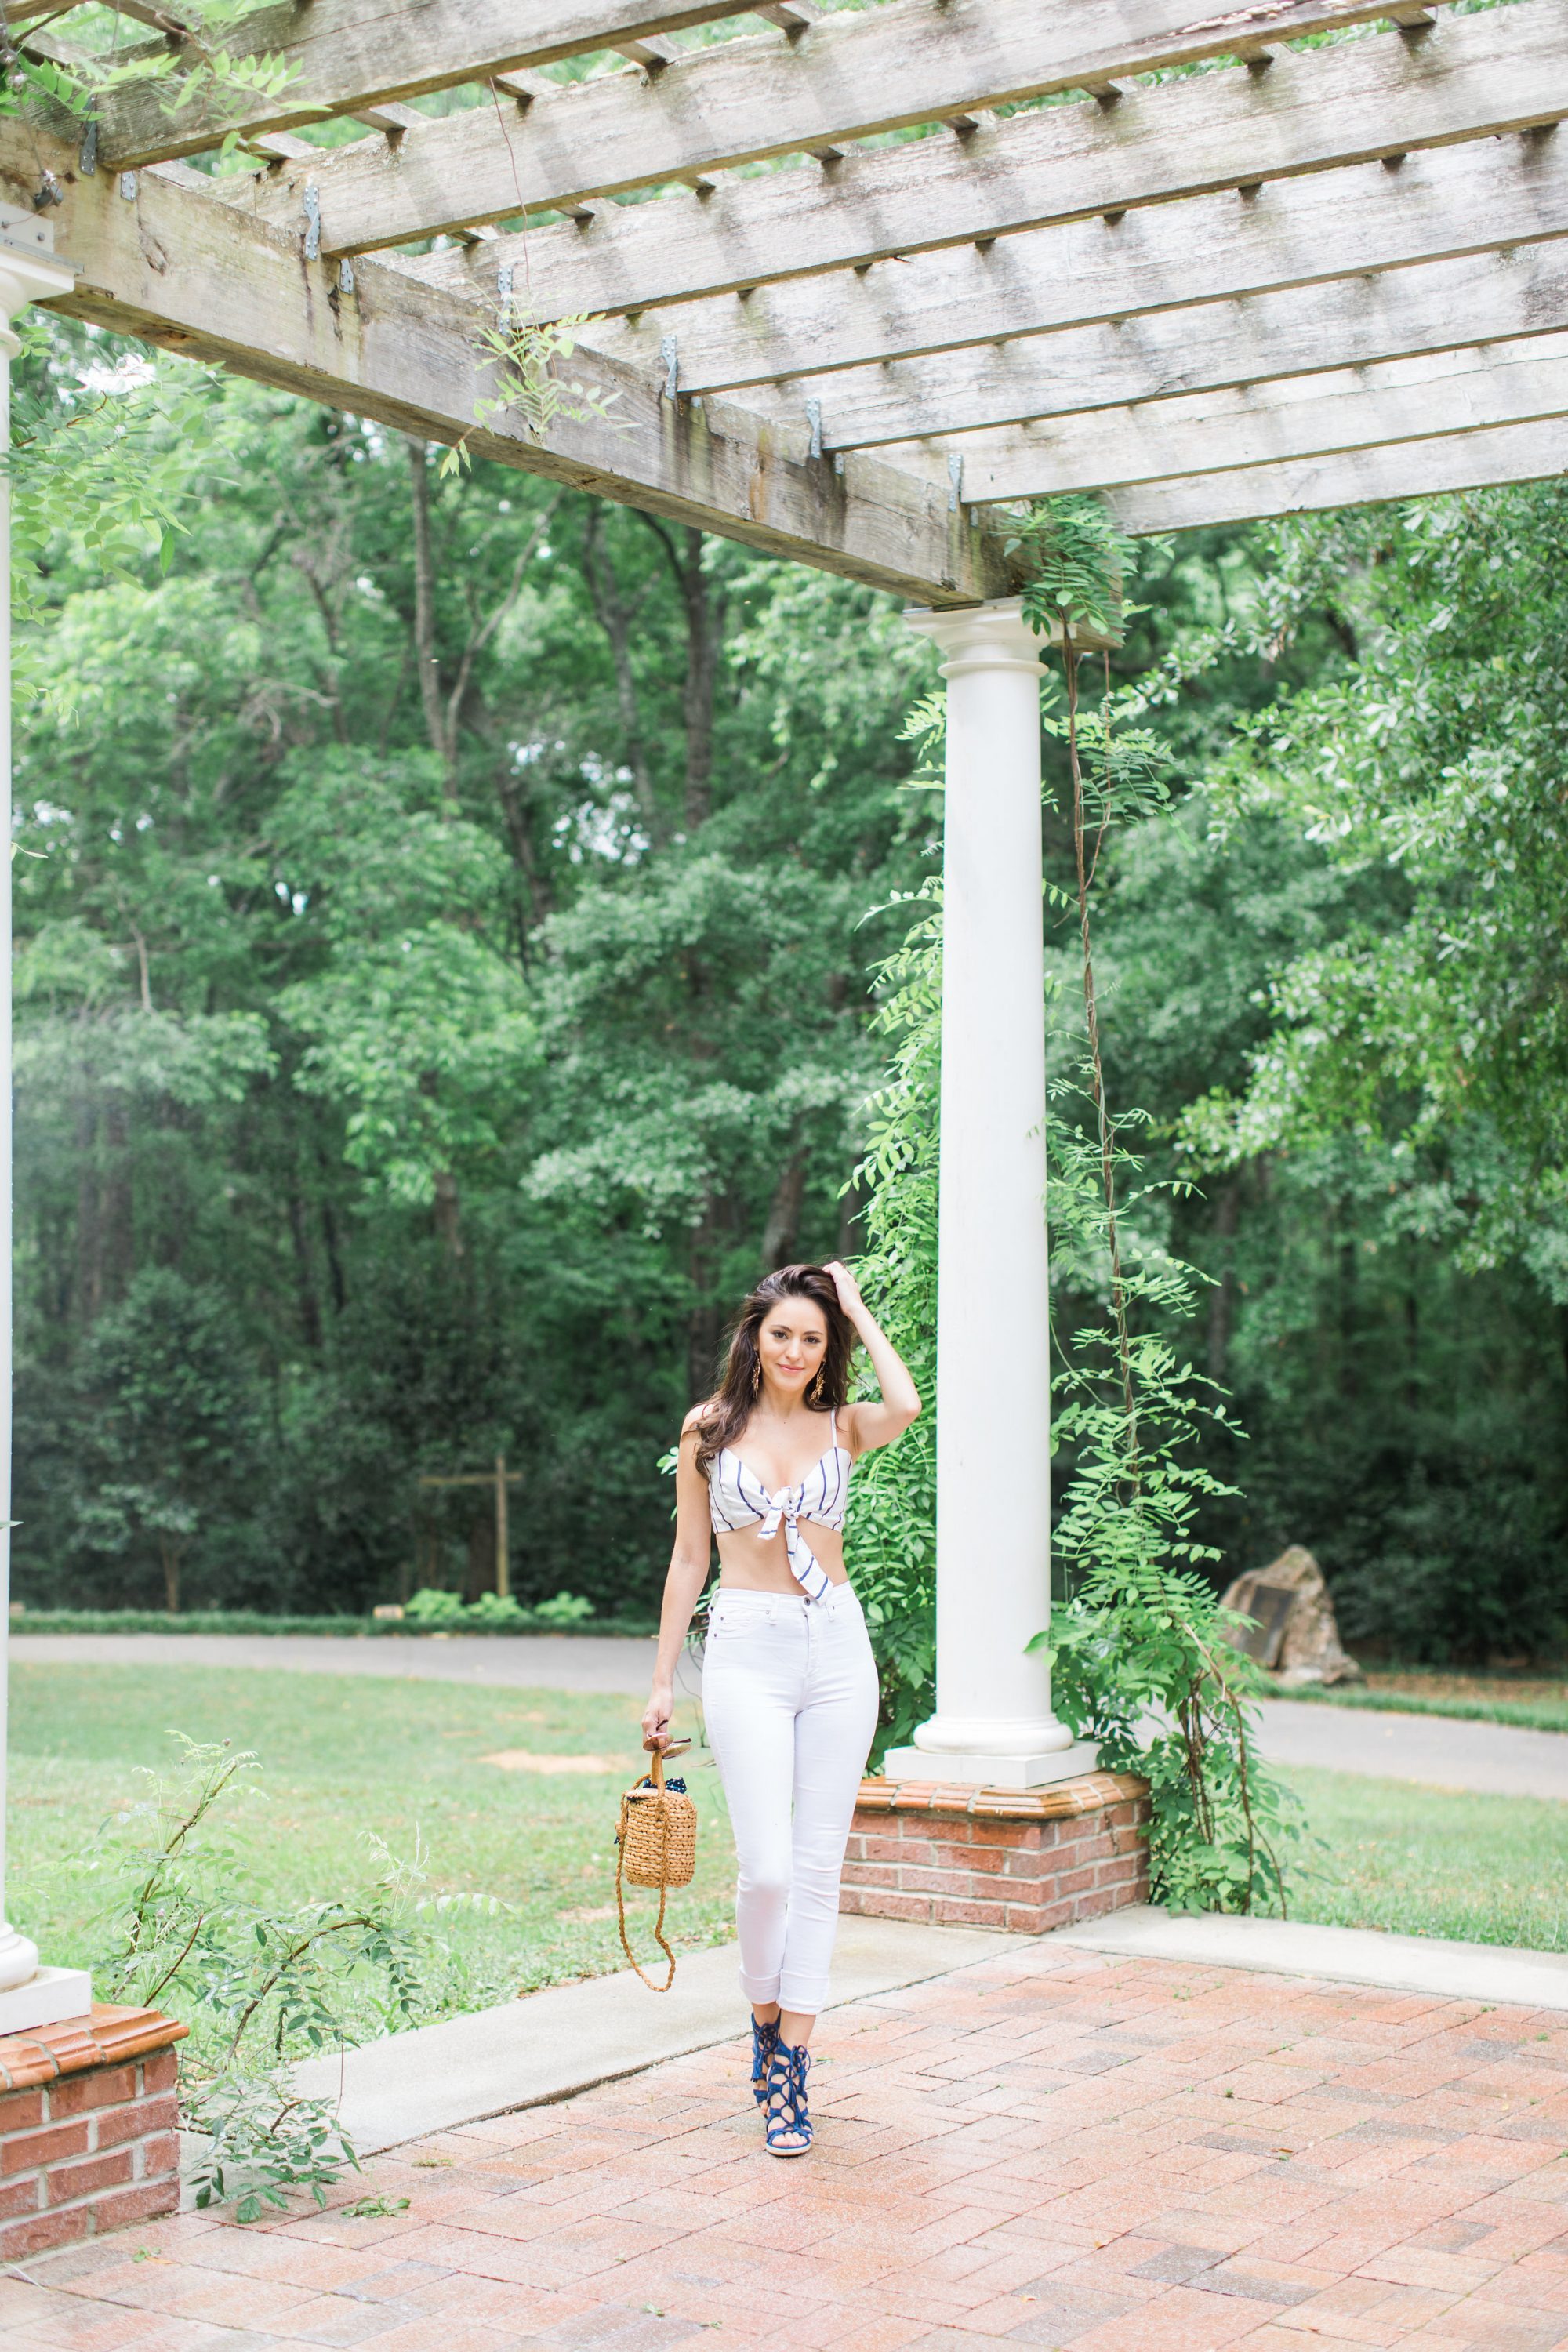 Baublebar Blossom Drop Earrings, FAITHFULL THE BRAND Garnier Top, spring outfit ideas, summer outfit ideas, what to wear for memorial day, what to wear for july 4, fourth of july outfit ideas, summer outfit inspiration